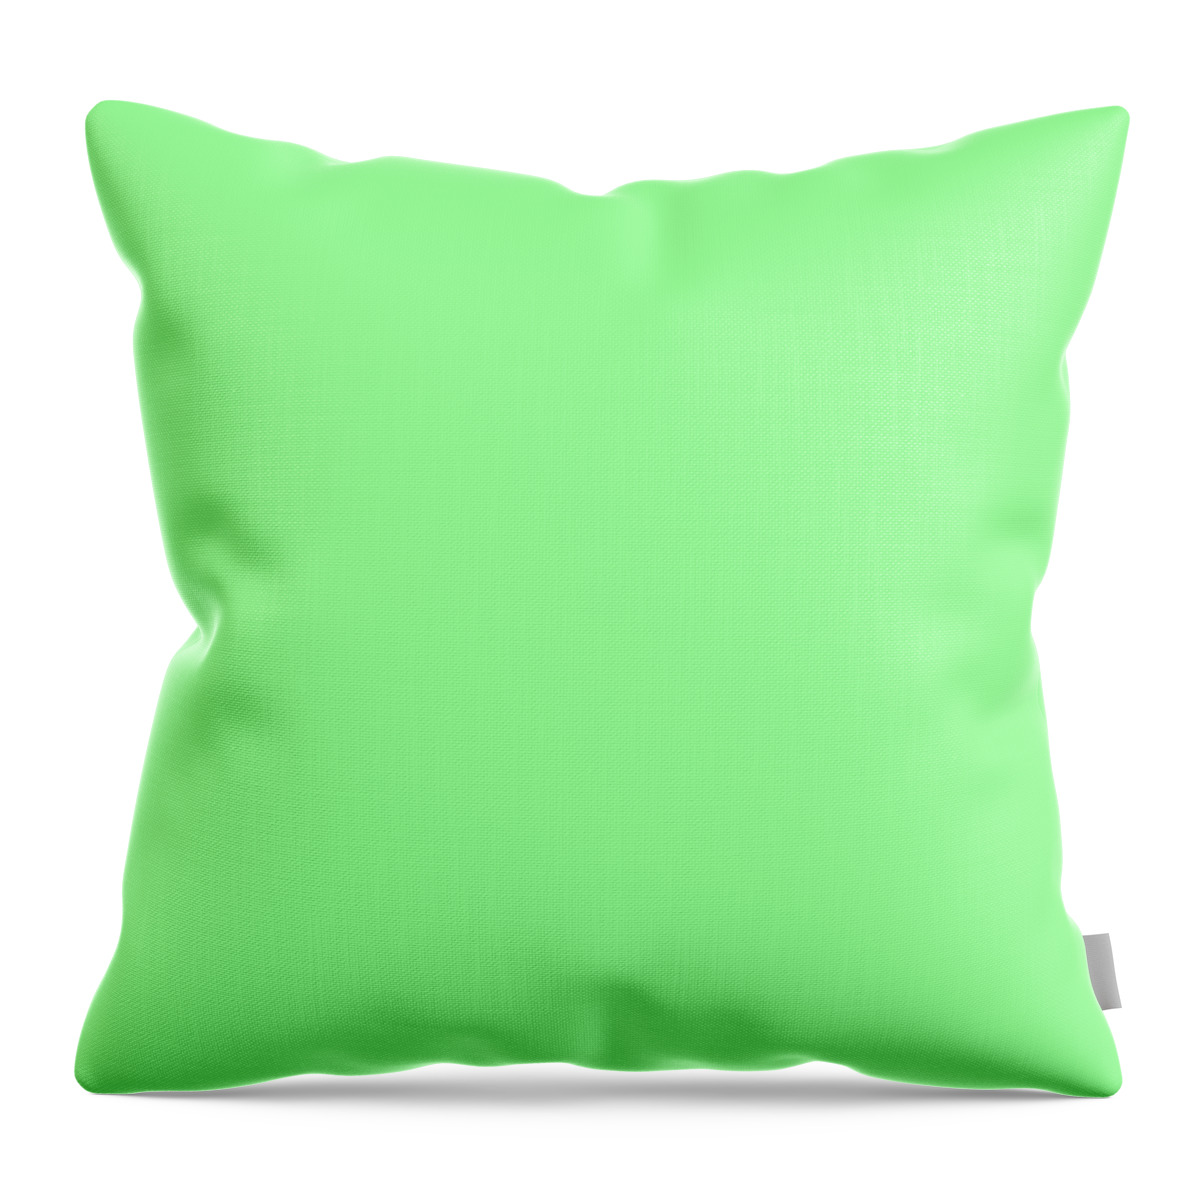 Bright Mint Throw Pillow featuring the digital art Bright Mint by TintoDesigns